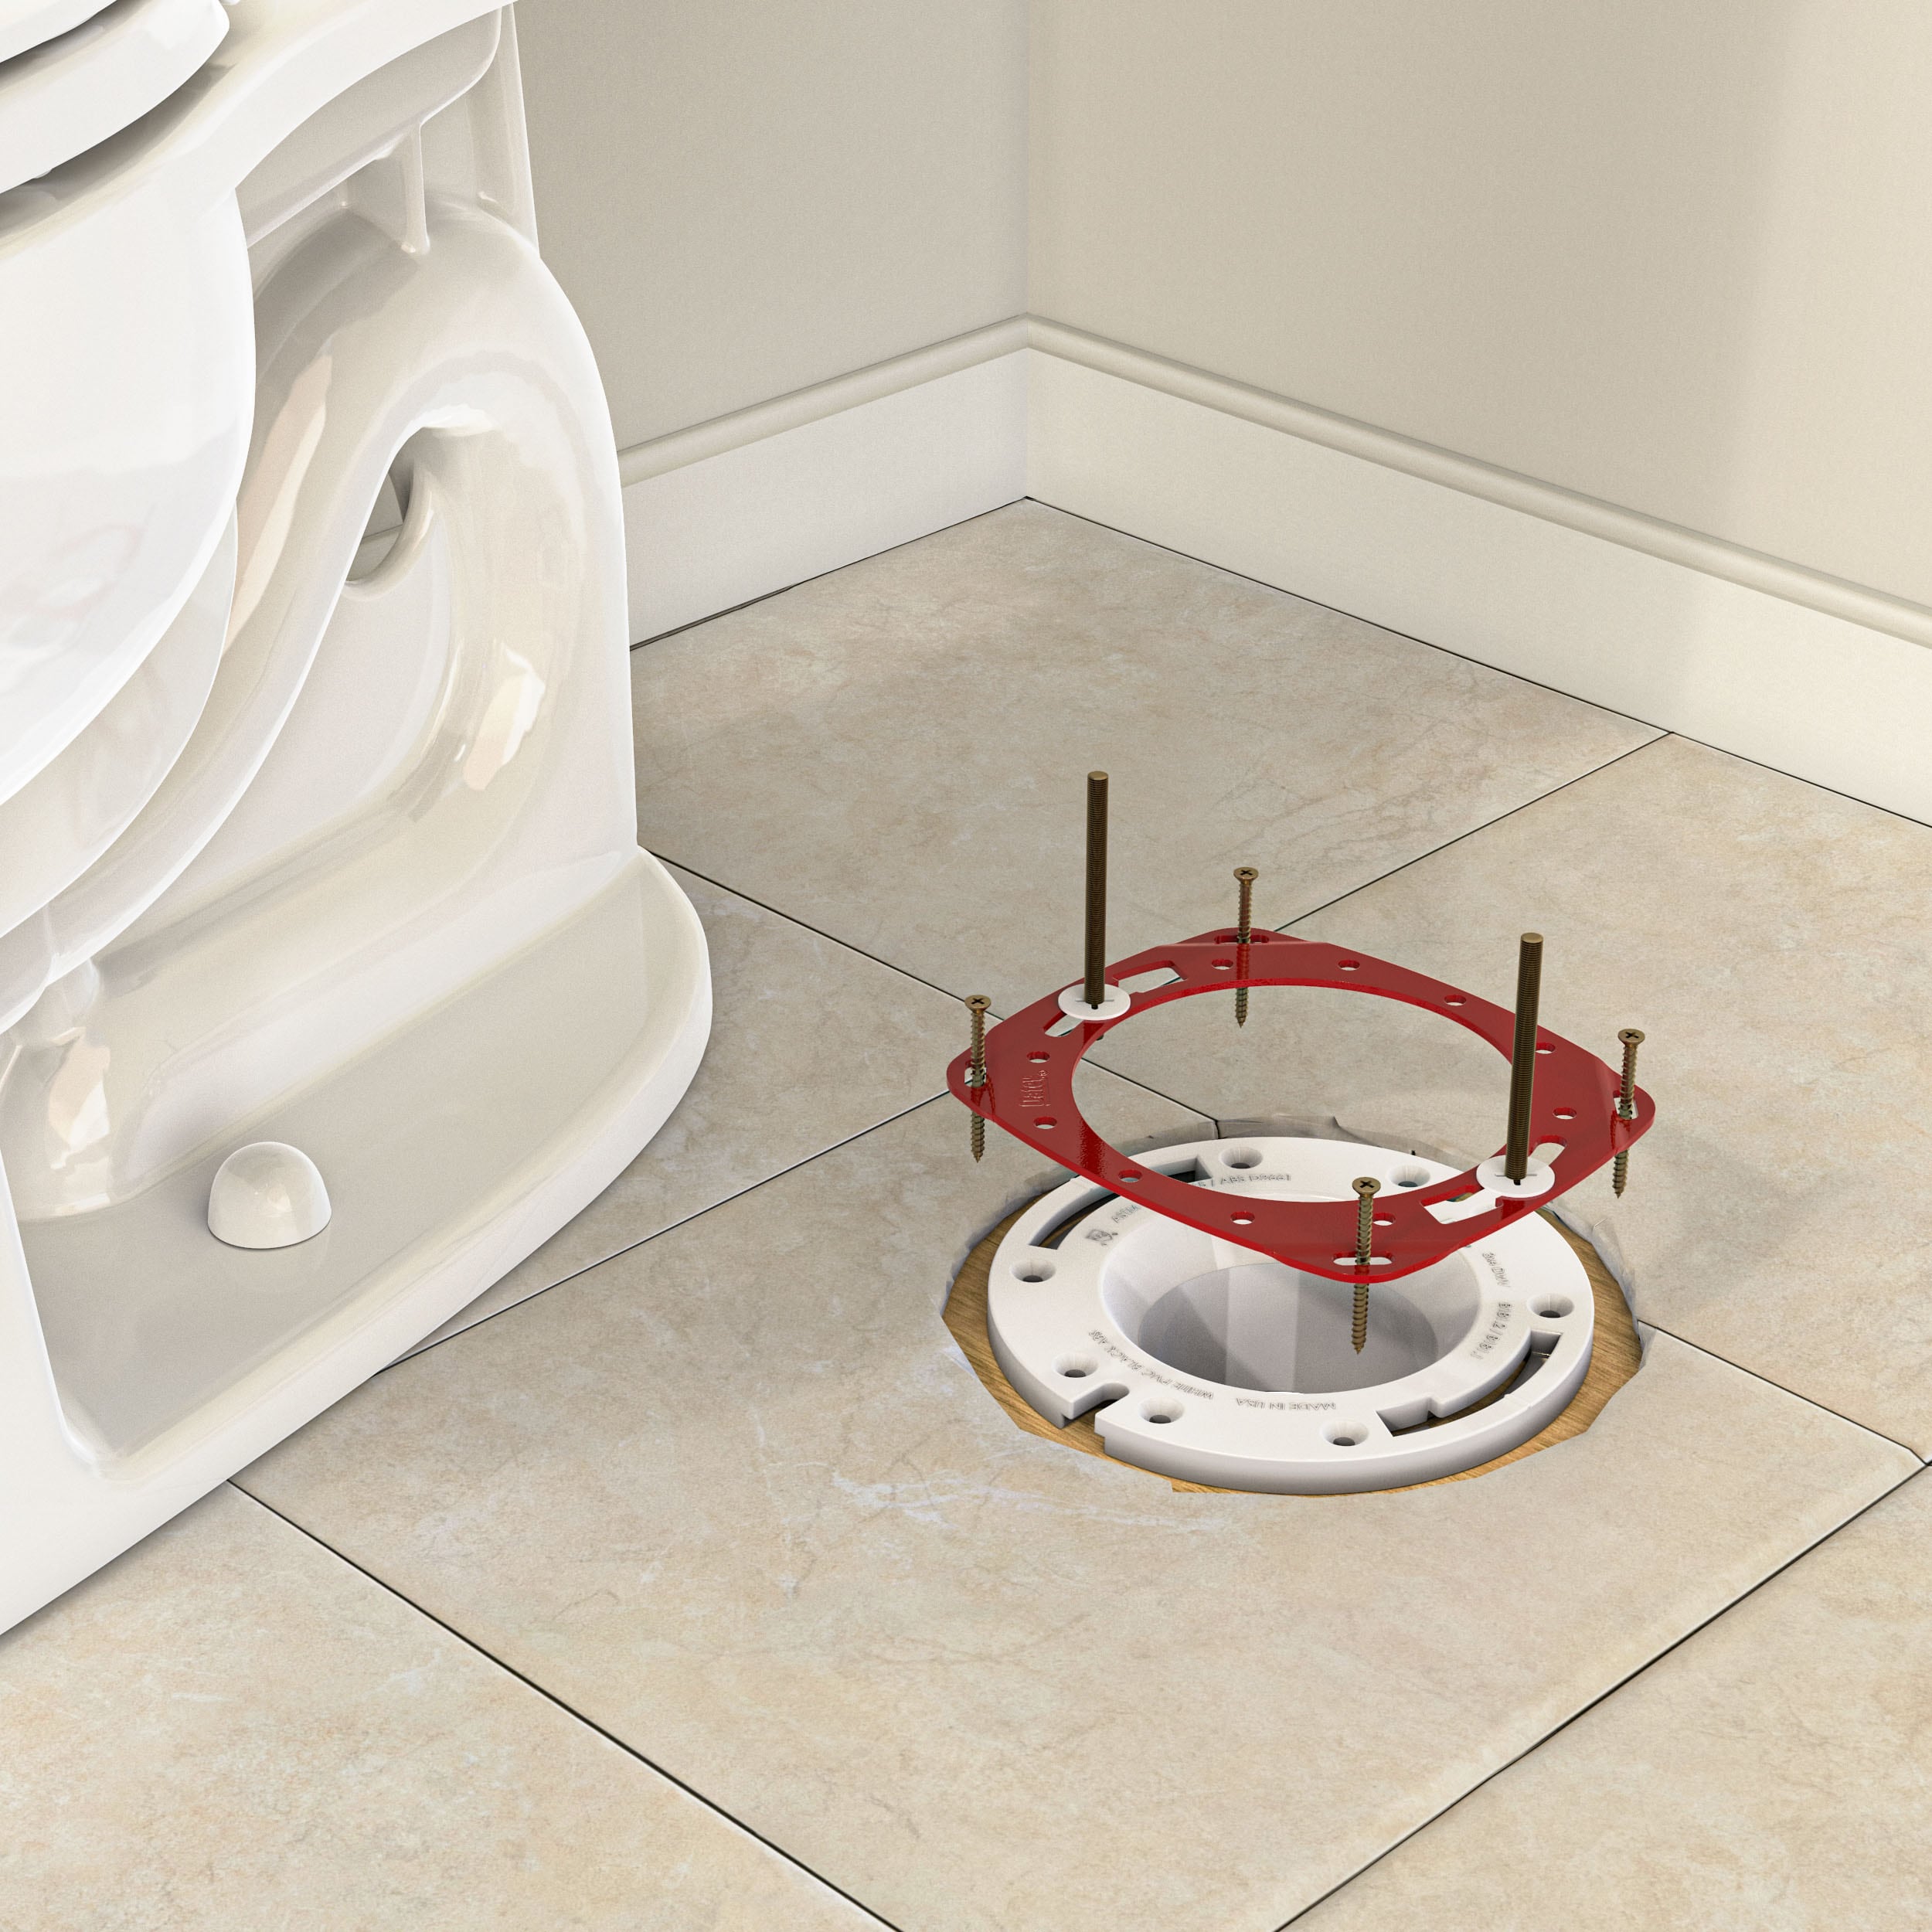 How to Replace a Toilet Flange